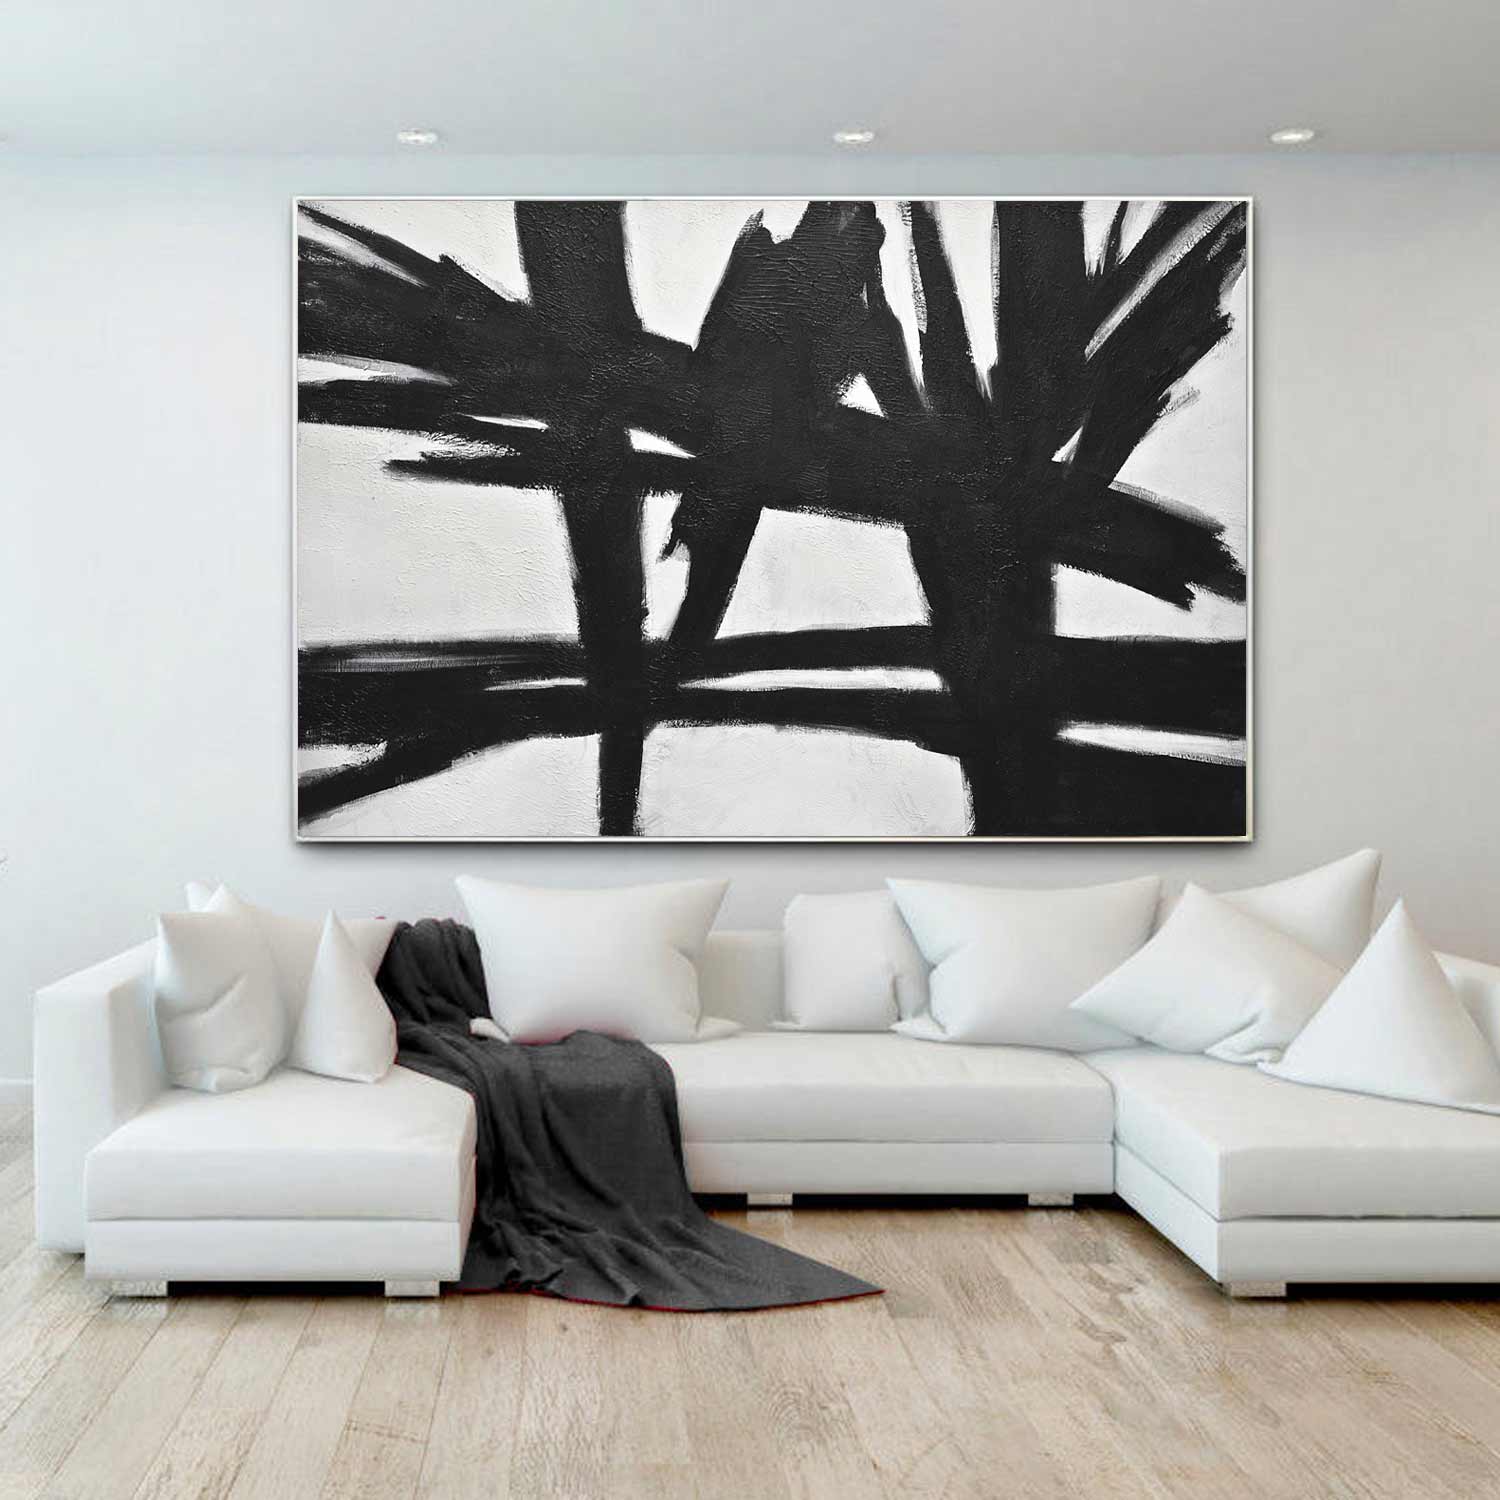 Retro Style Abstract Painting Black White 50's Art "Reaching Out"